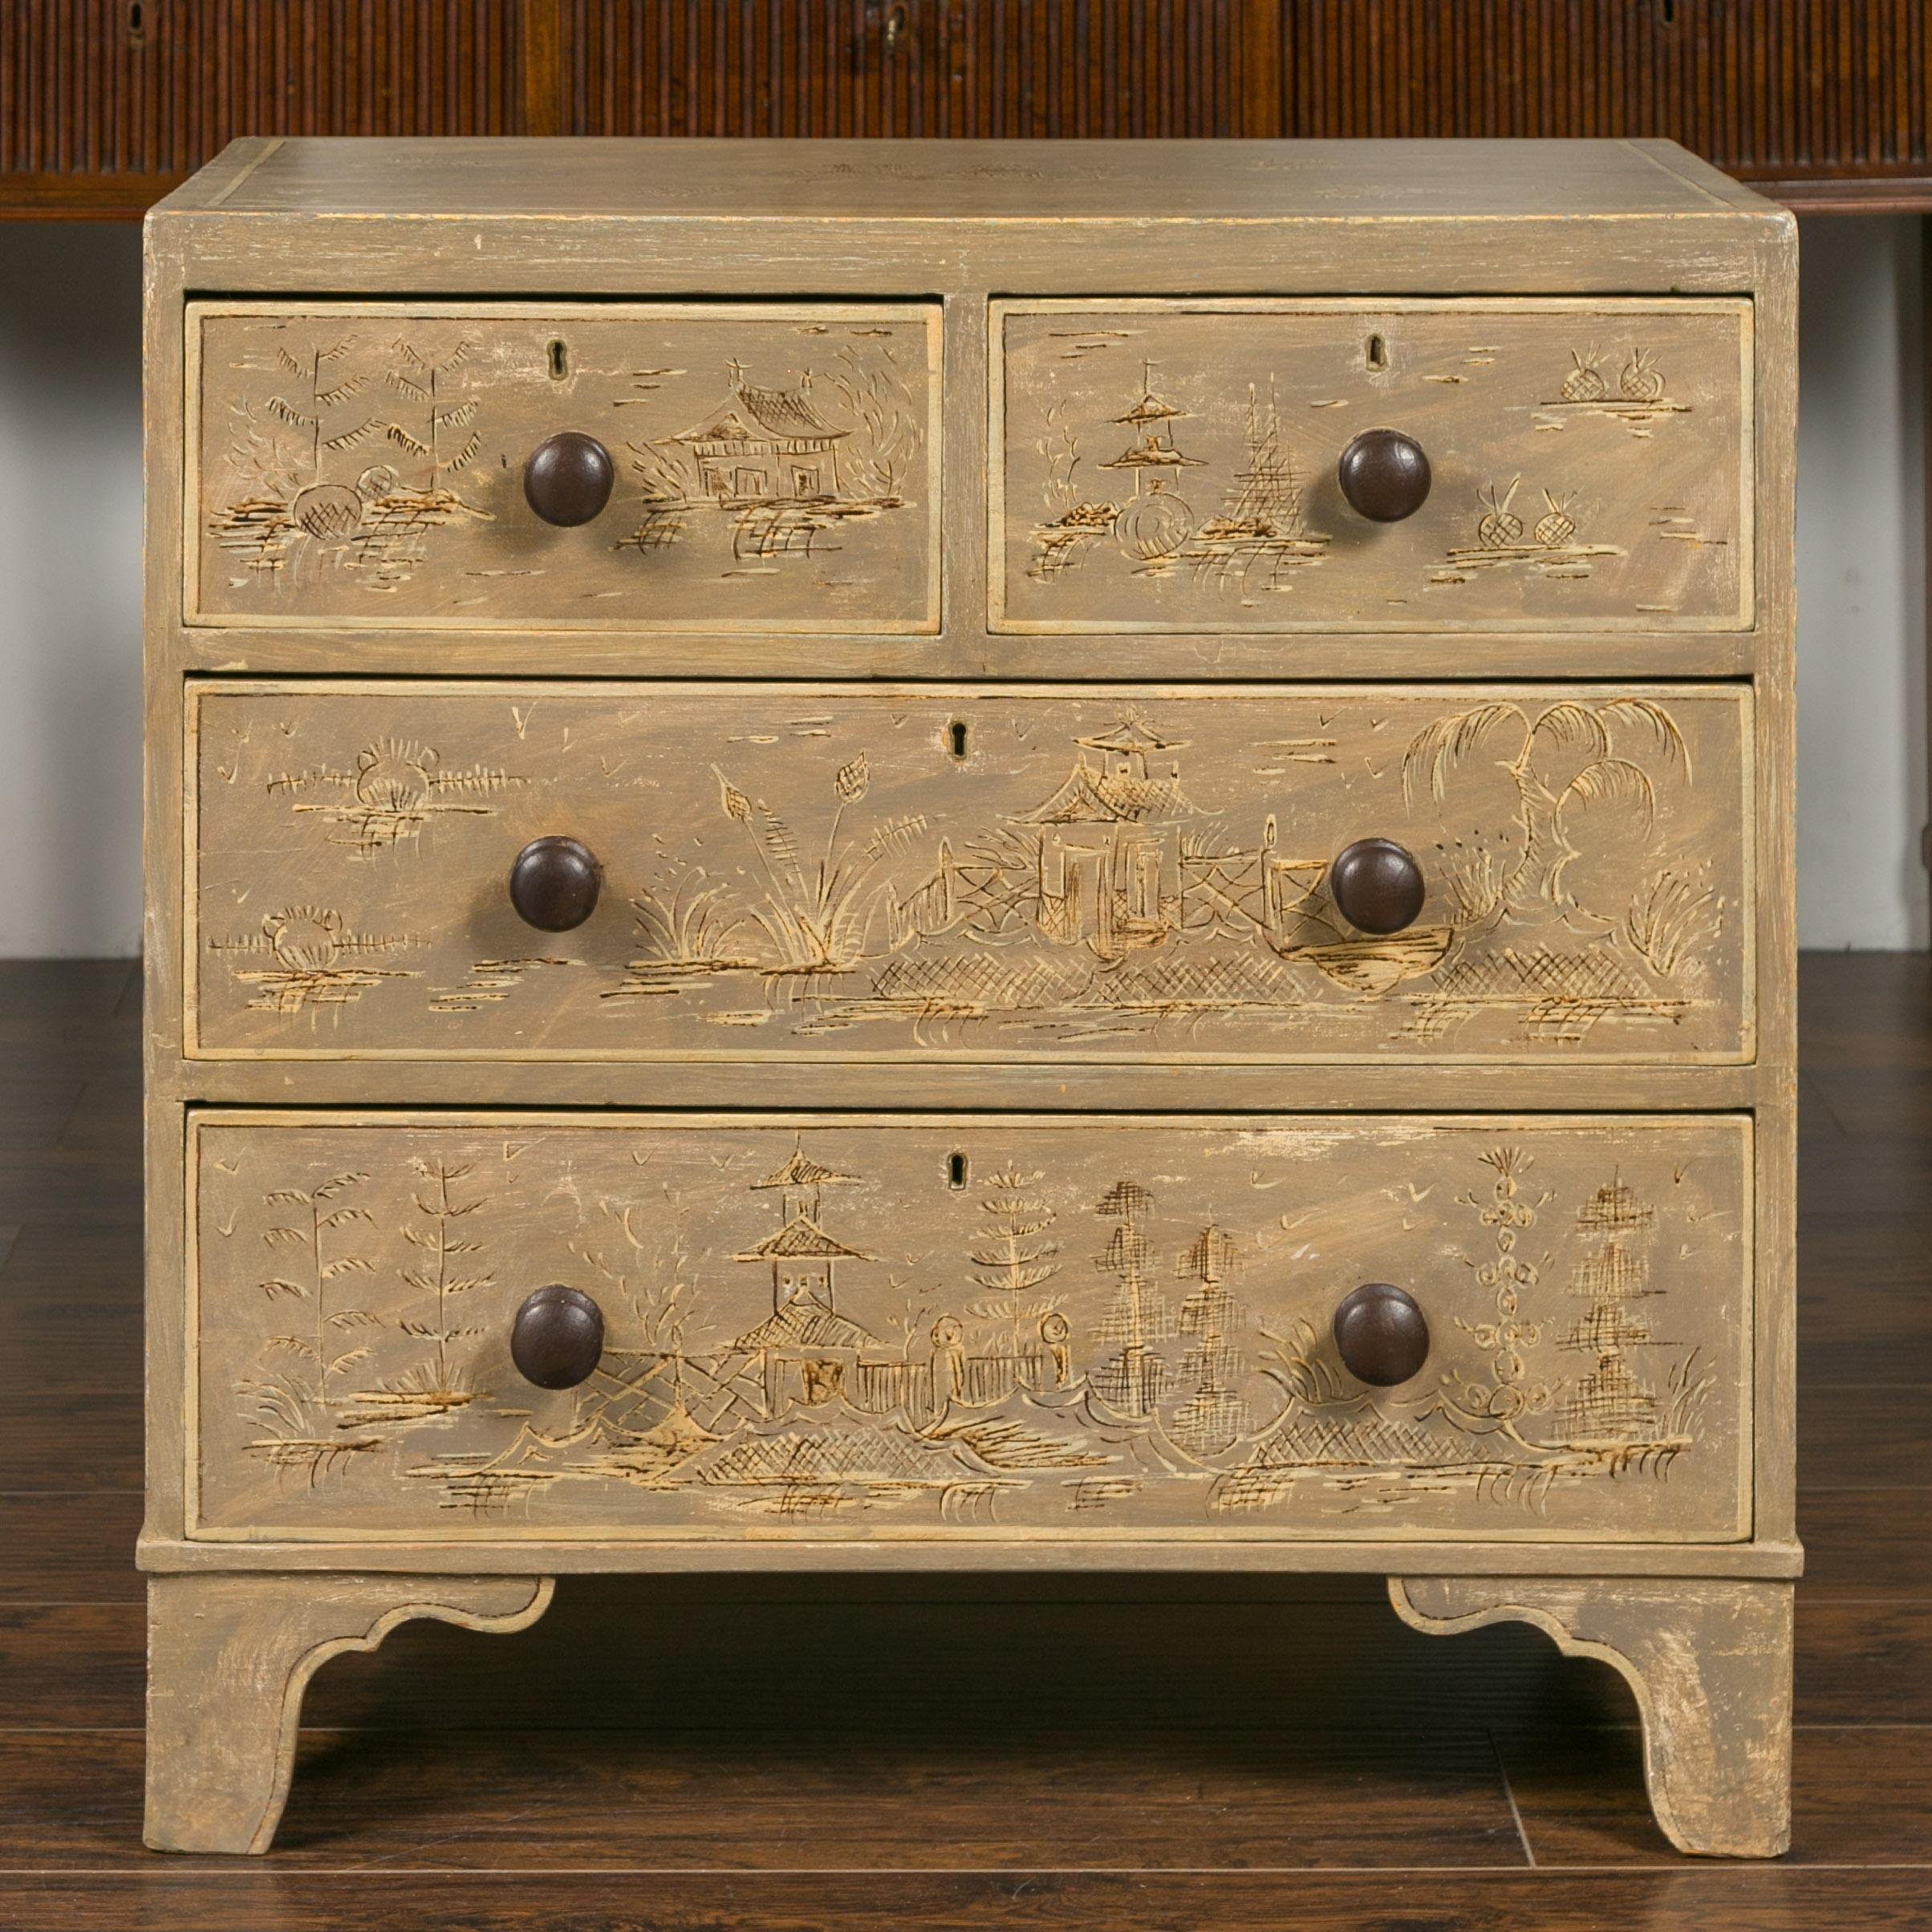 An English chinoiserie painted chest of drawers from the mid-19th century with some original paint and some later painting on ogee bracket feet. Born in England during the third quarter of the 19th century, this painted chest features a rectangular